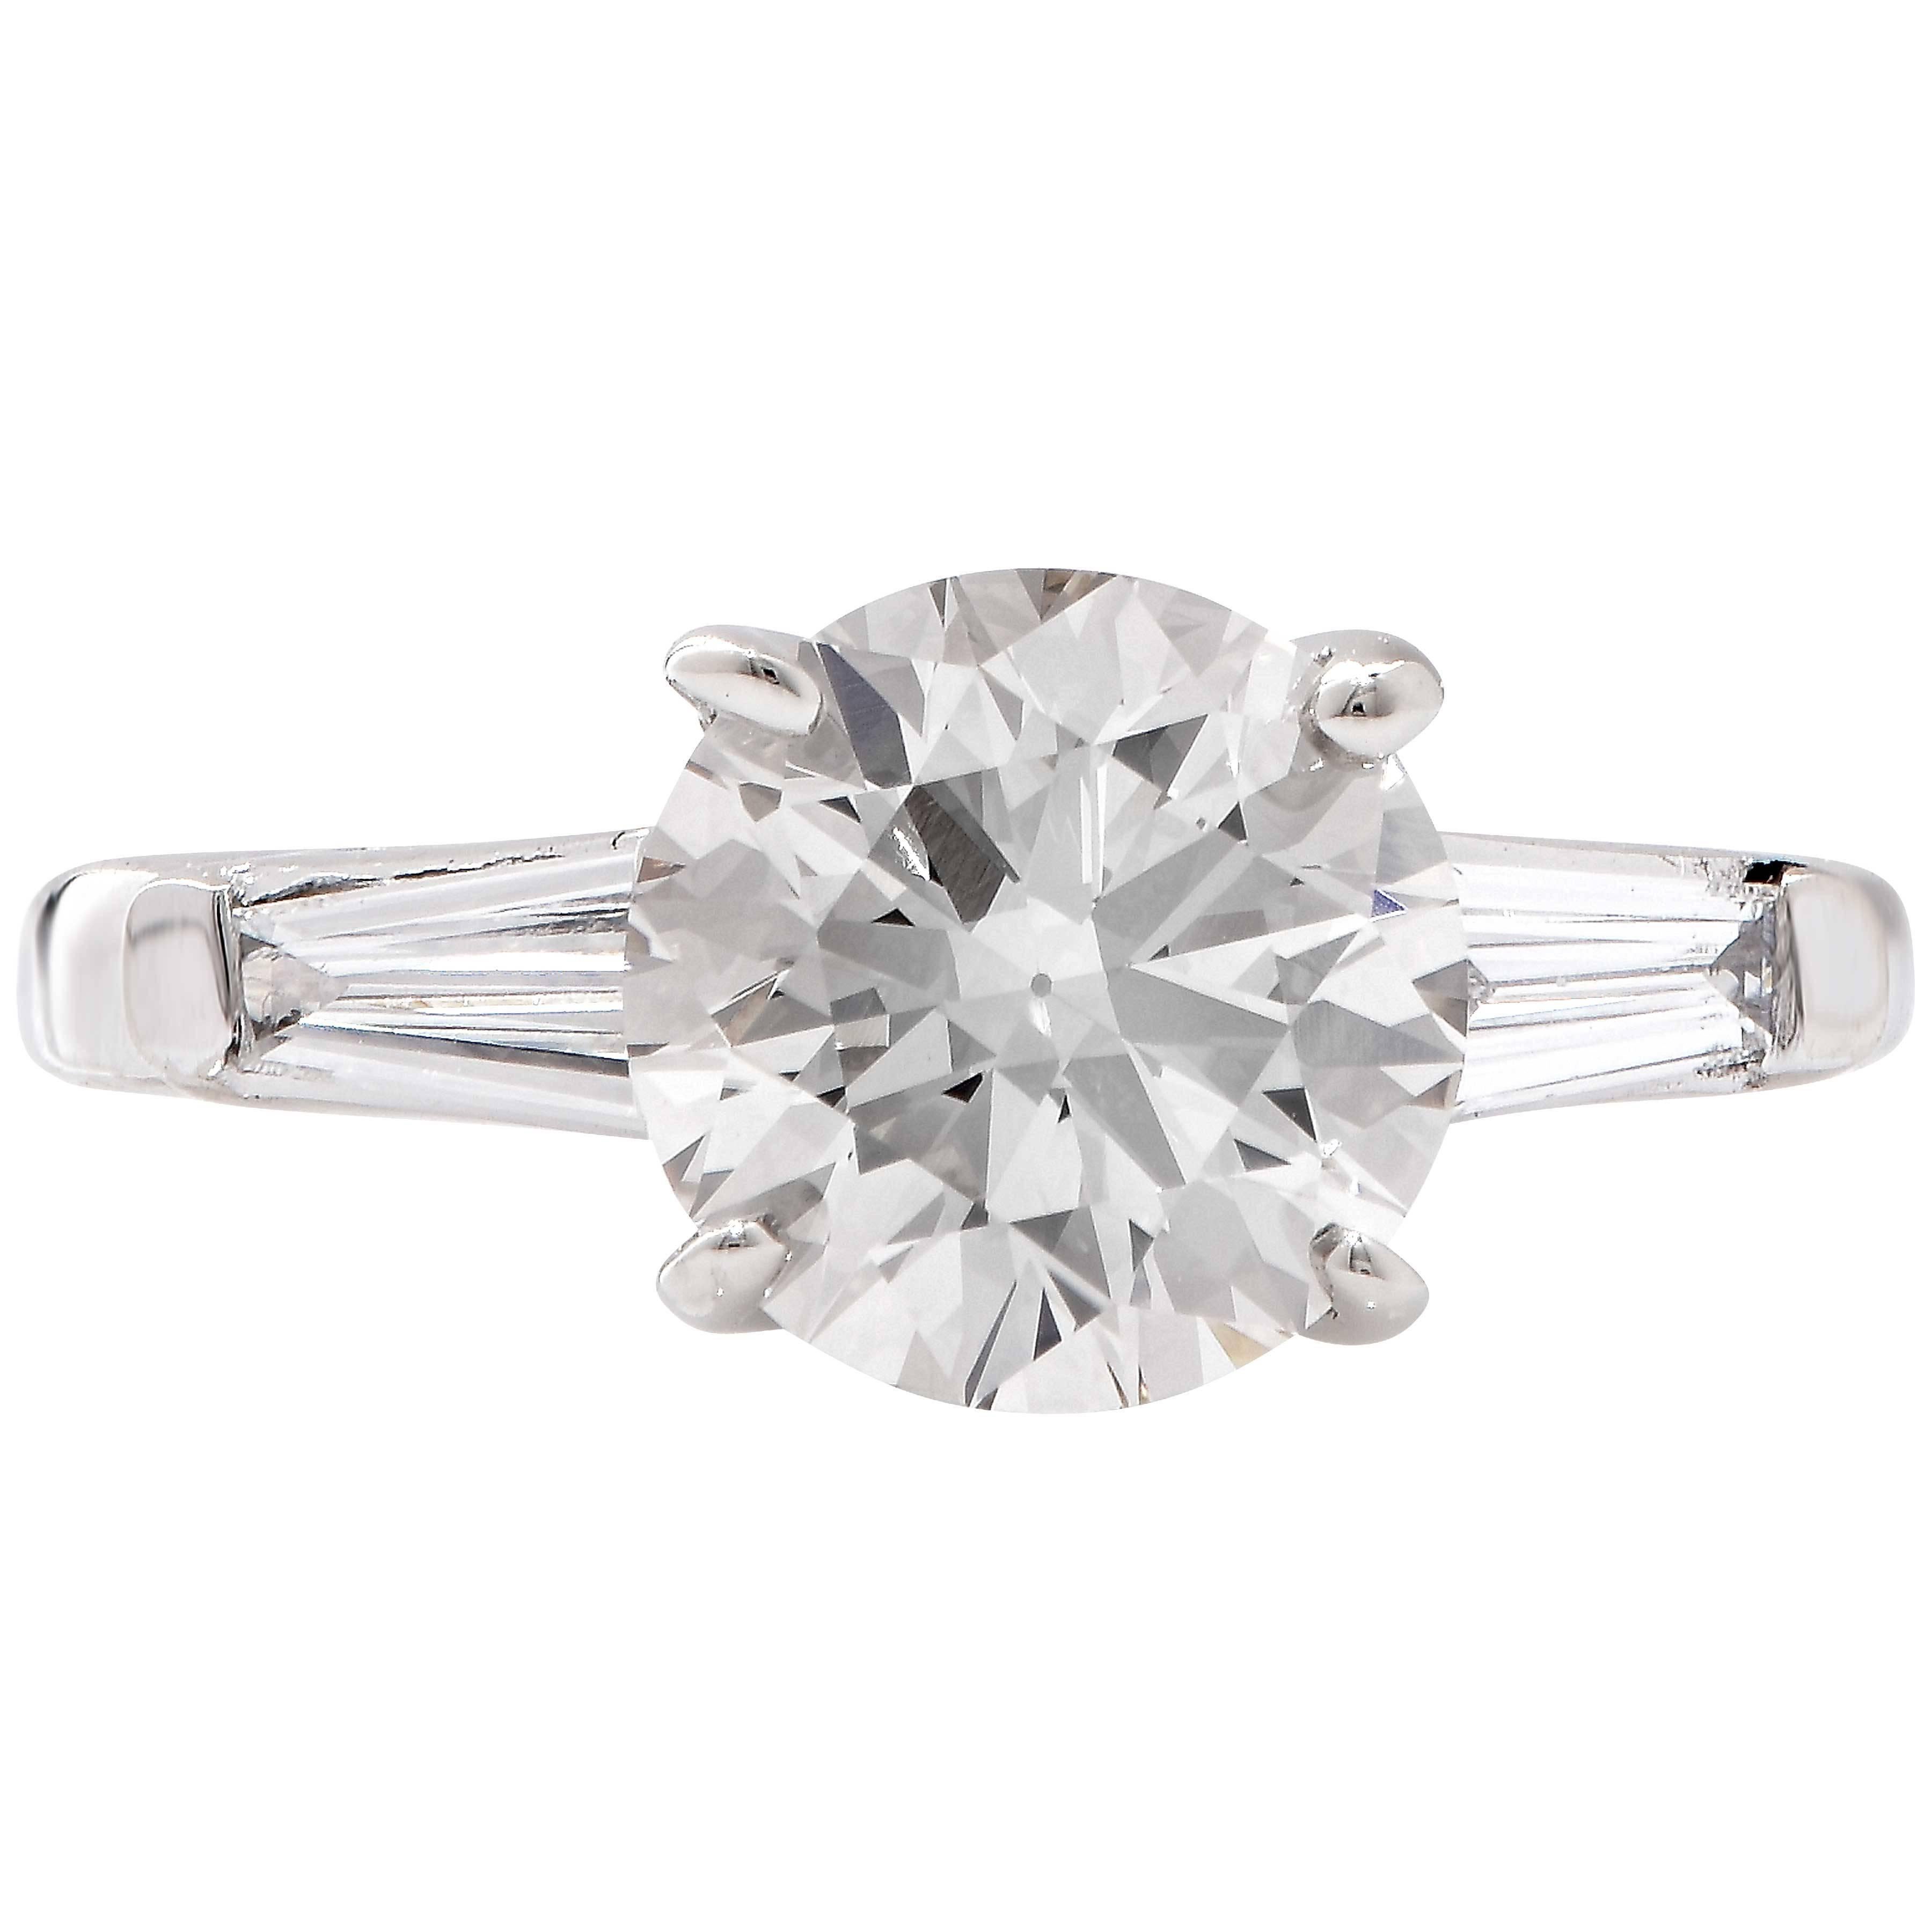 GIA Graded 2.14 Carat M/ VS1 Round Brilliant Cut Diamond engagement ring with two tapered baguette cut diamonds with an estimated total weight of .30 carats.
Ring Size; 4 1/7
Metal Type: 14 Kt White Gold
Metal Weight: 4 Grams